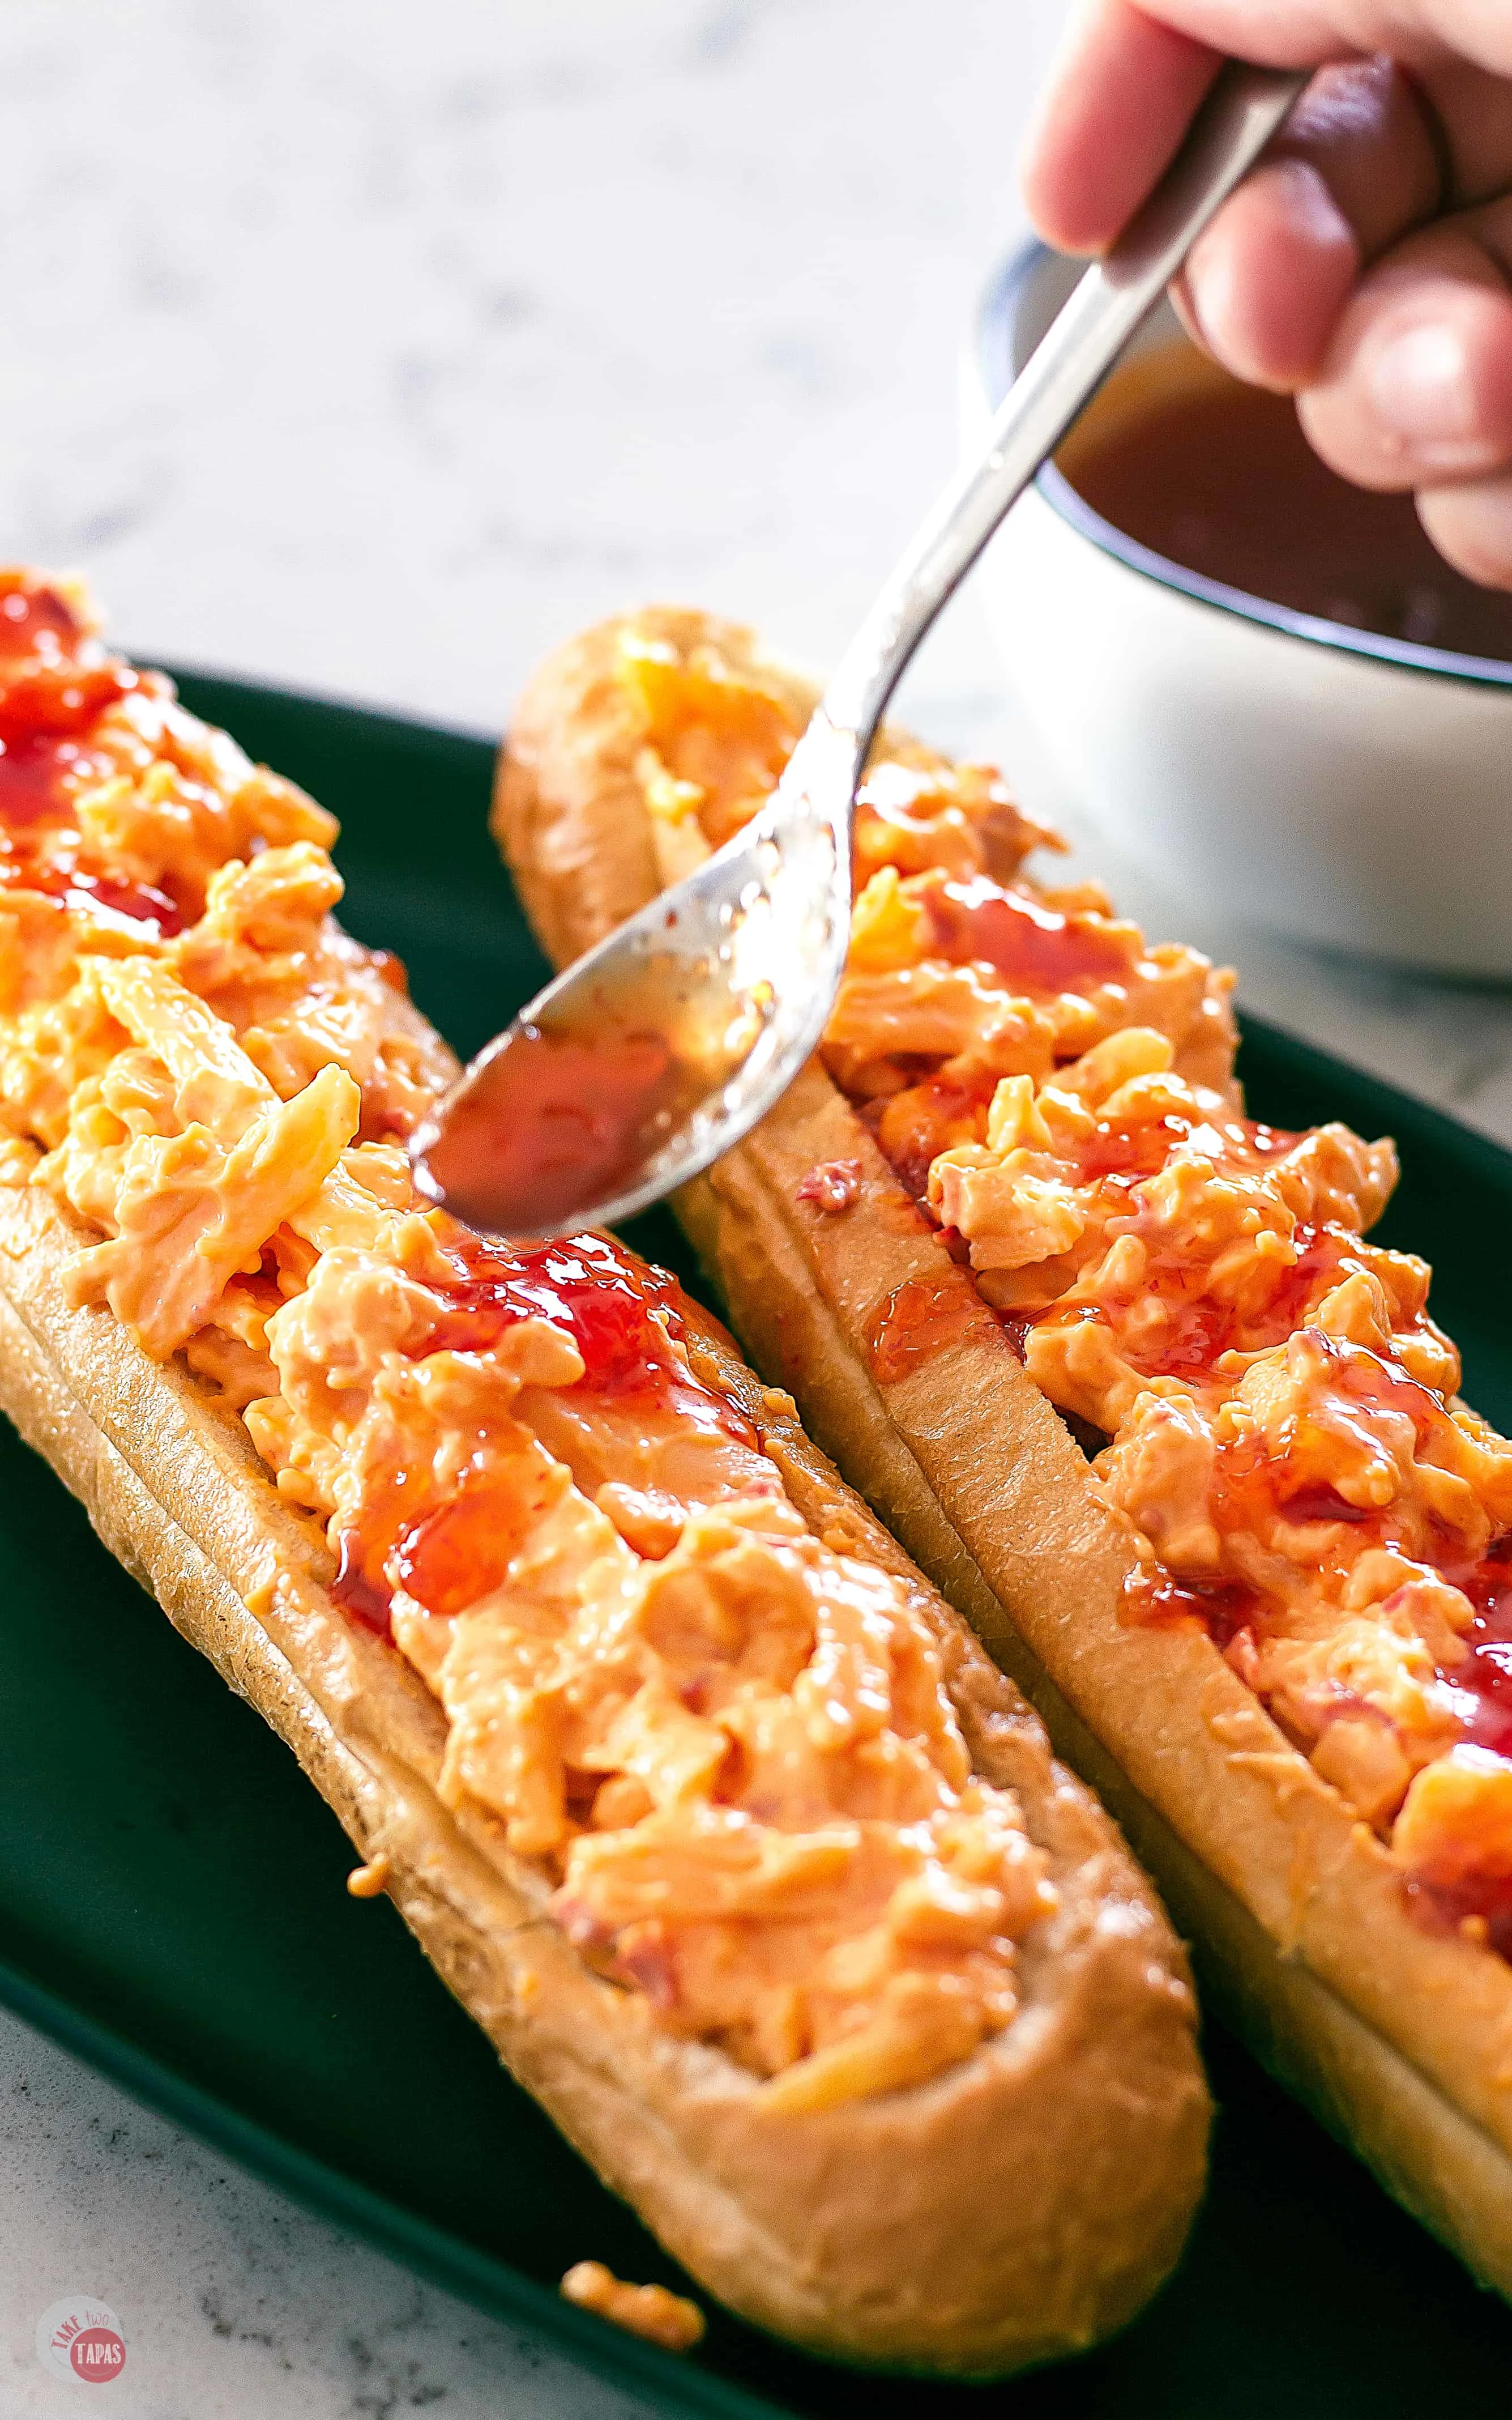 spooning pepper jelly on the pimento cheese stuffed bread